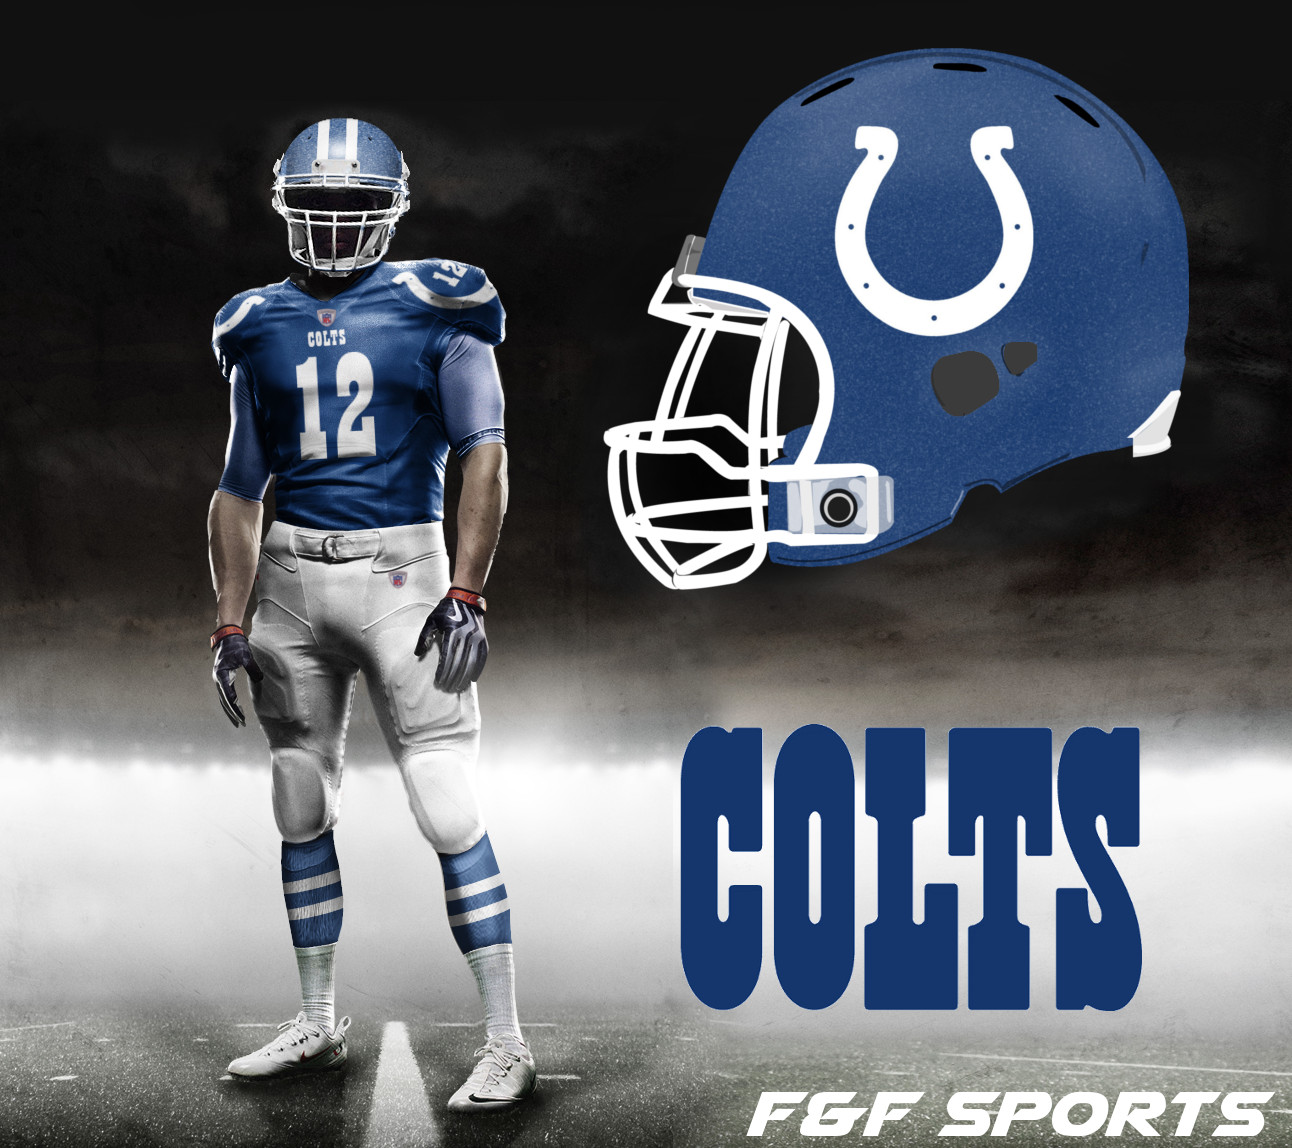 colts-concept-home.jpg